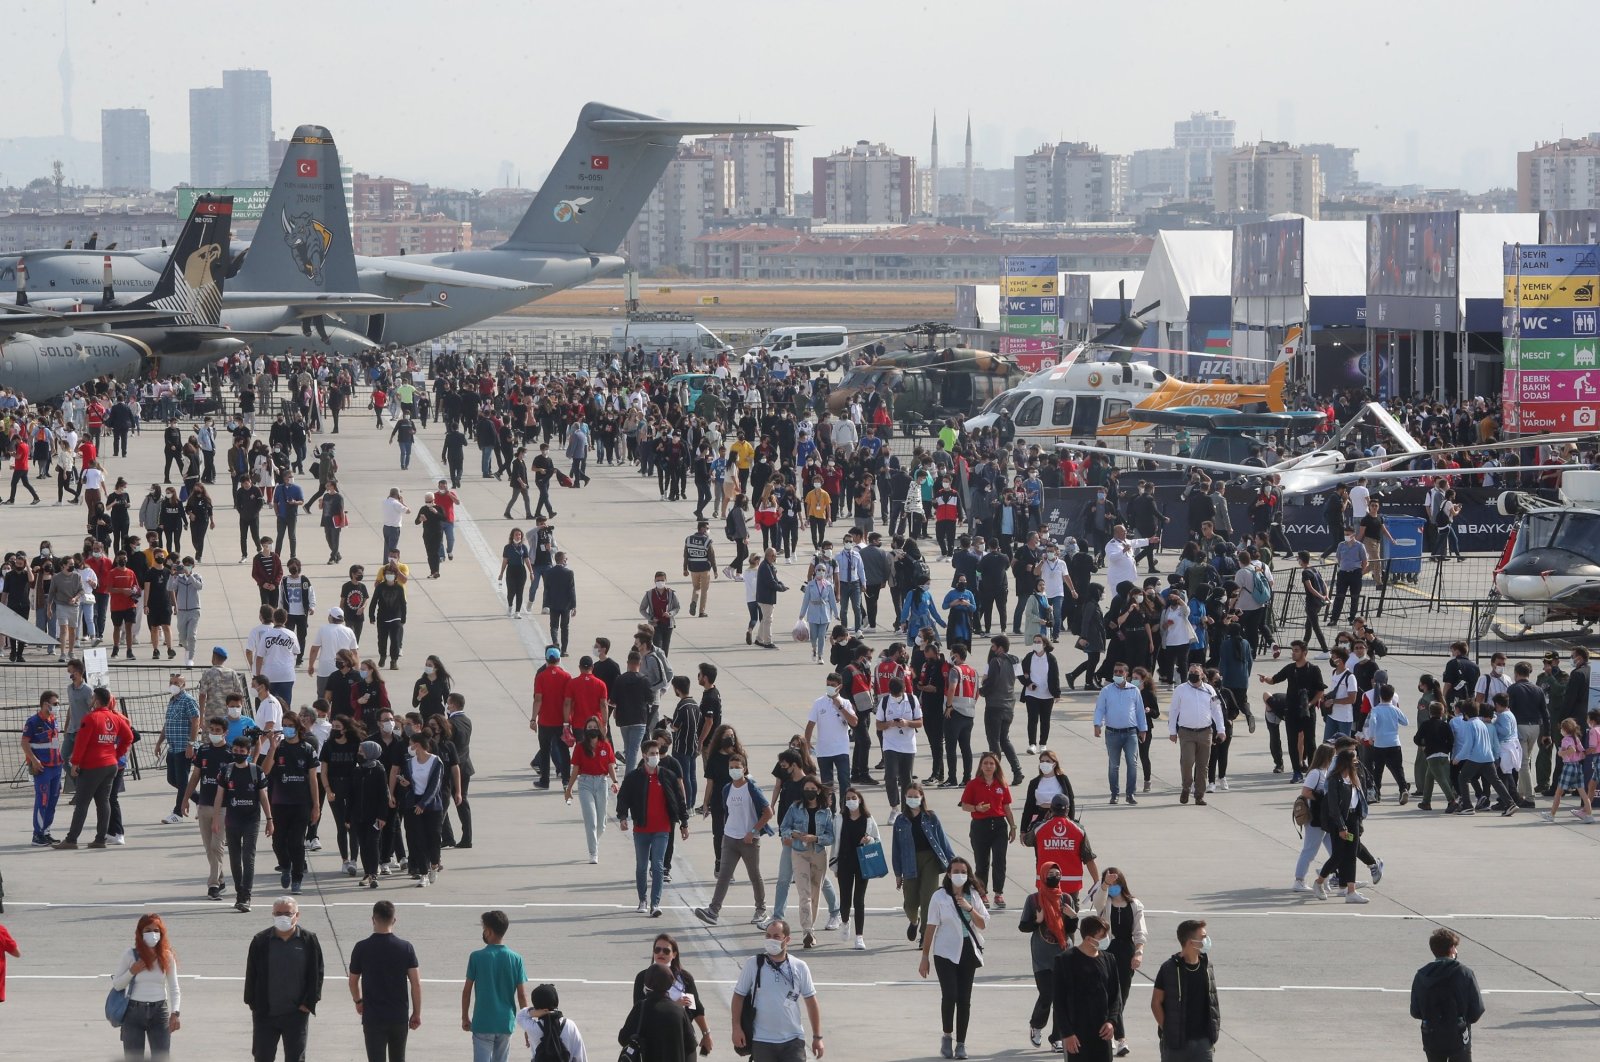 Visitors arrive at Atatürk Airport for the fourth edition of Turkey’s largest aerospace and technology event, Teknofest, in Istanbul, Turkey, Sept. 21, 2021. (DHA Photo)